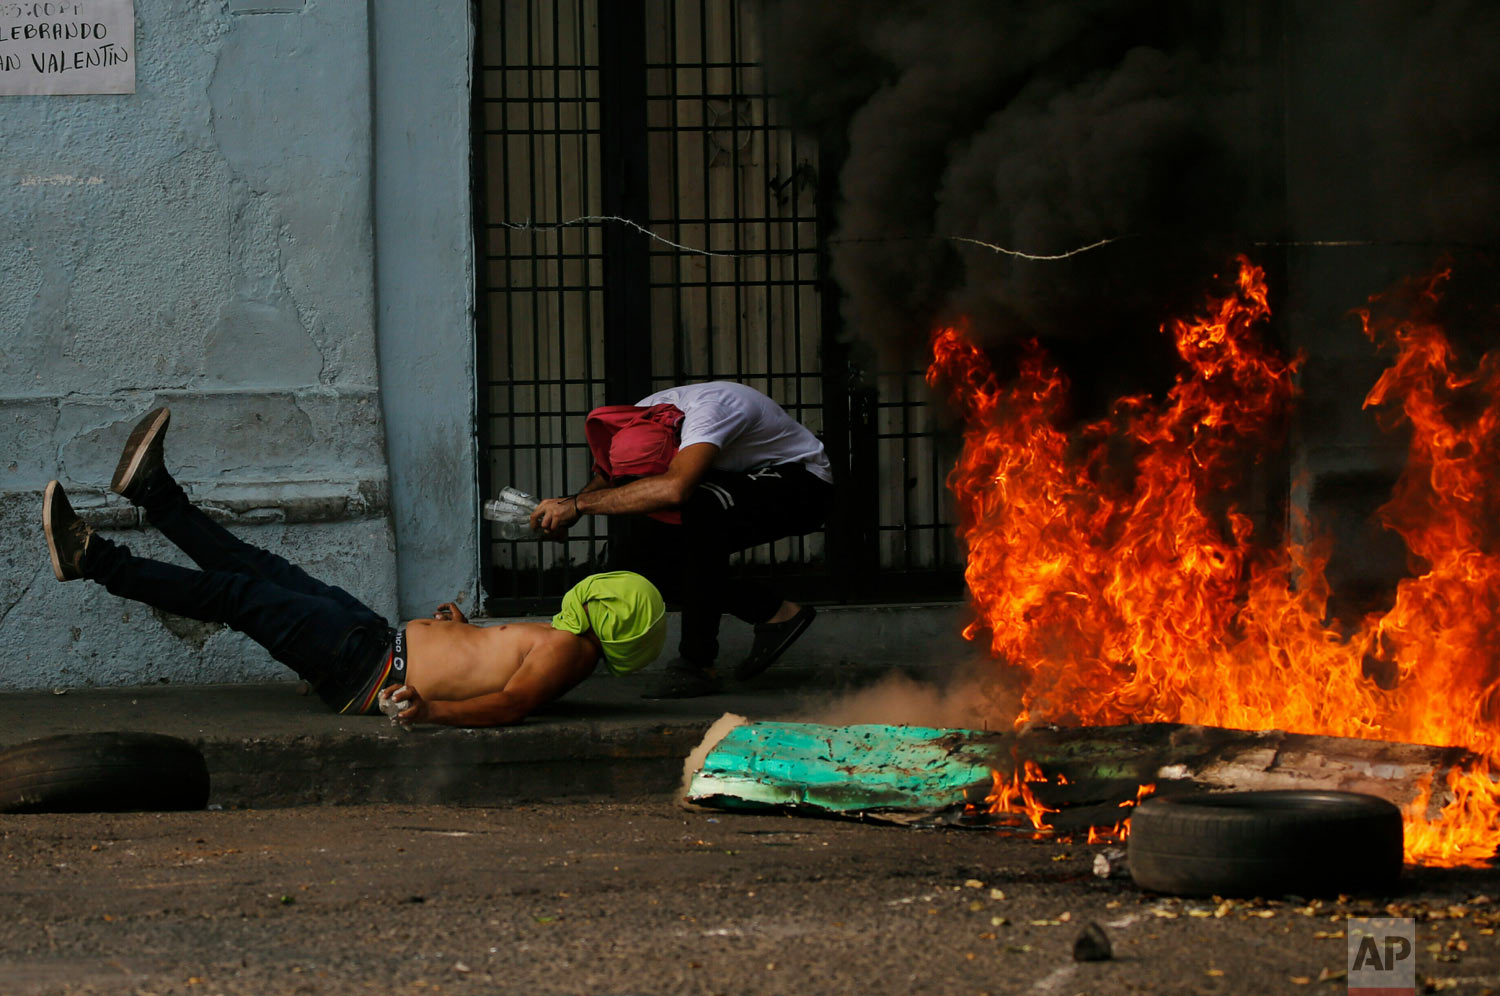  A demonstrator falls after getting caught by barbed wire during clashes with the Venezuelan Bolivarian National Guard in Urena, Venezuela, near the border with Colombia, Saturday, Feb. 23, 2019. (AP Photo/Fernando Llano) 